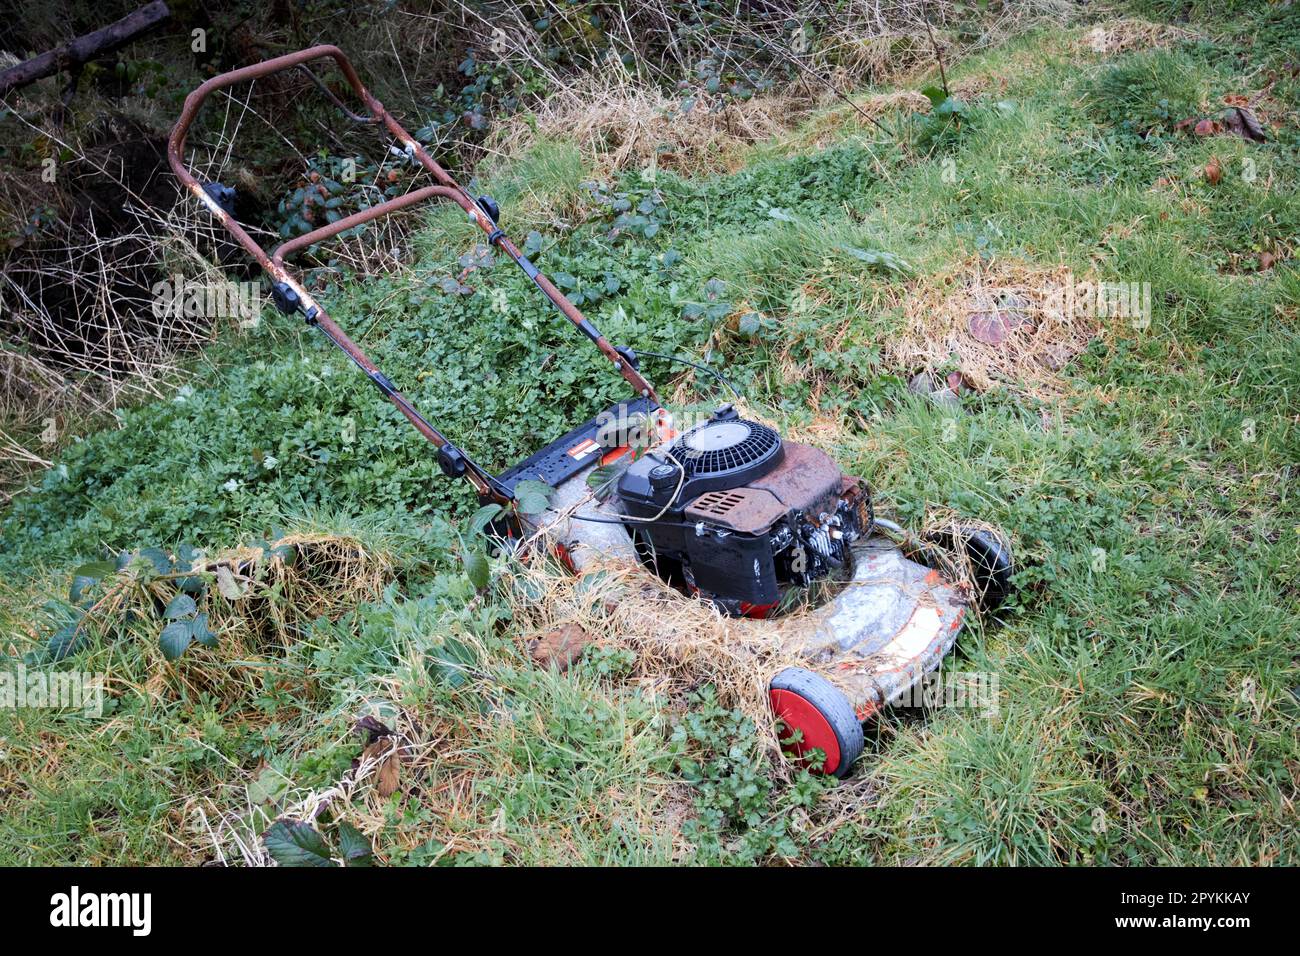 overgrown abandoned petrol lawnmower in field in county donegal republic of ireland Stock Photo